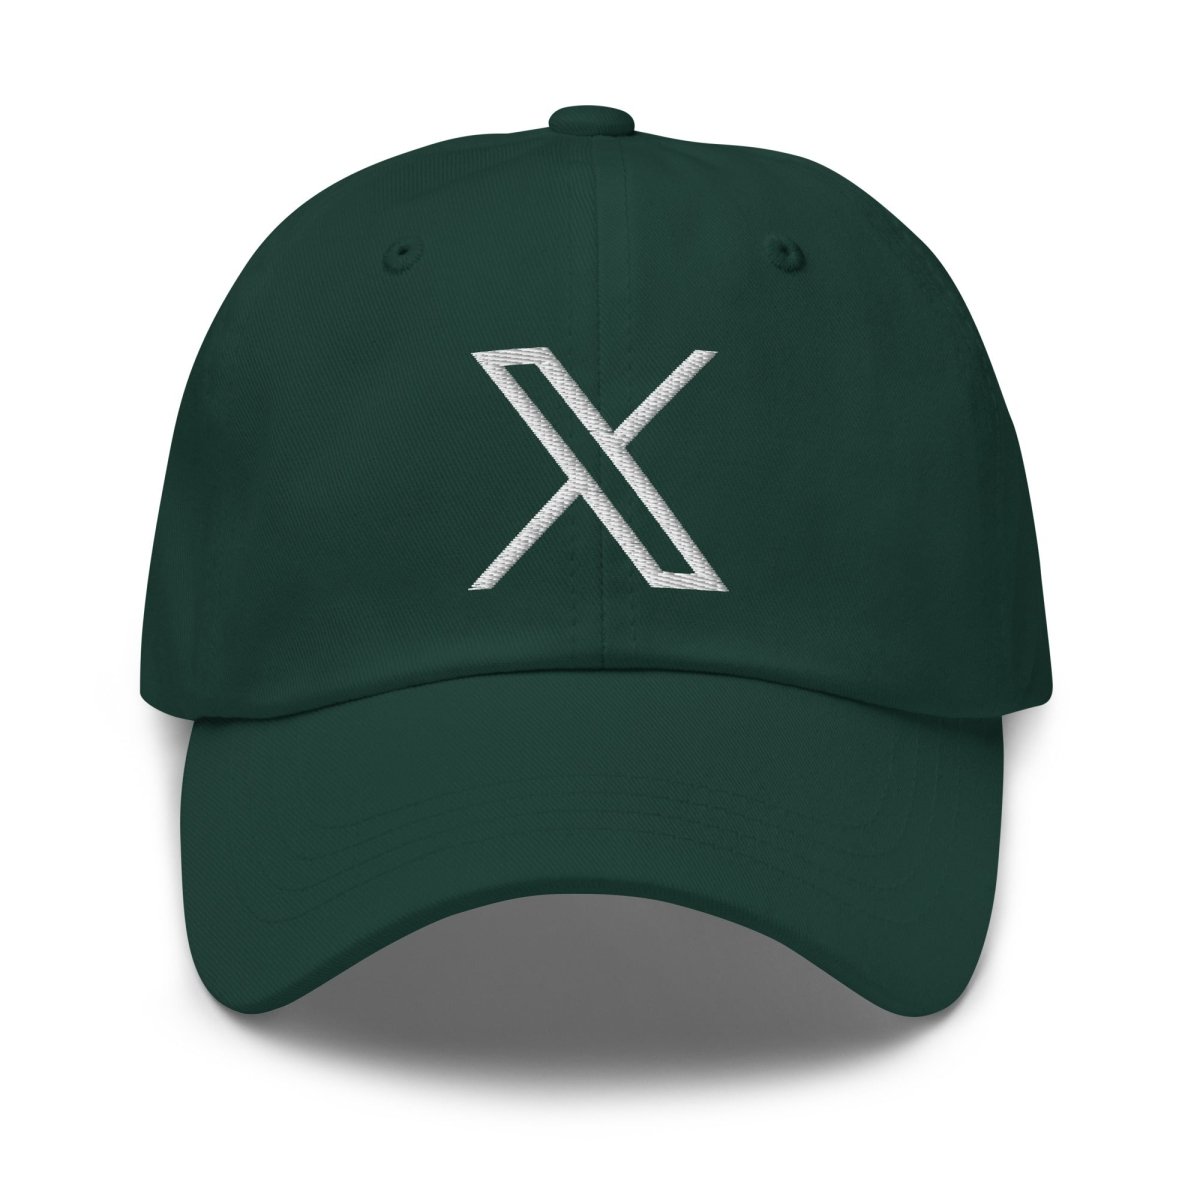 Twitter X Logo Embroidered Cap - Spruce - AI Store